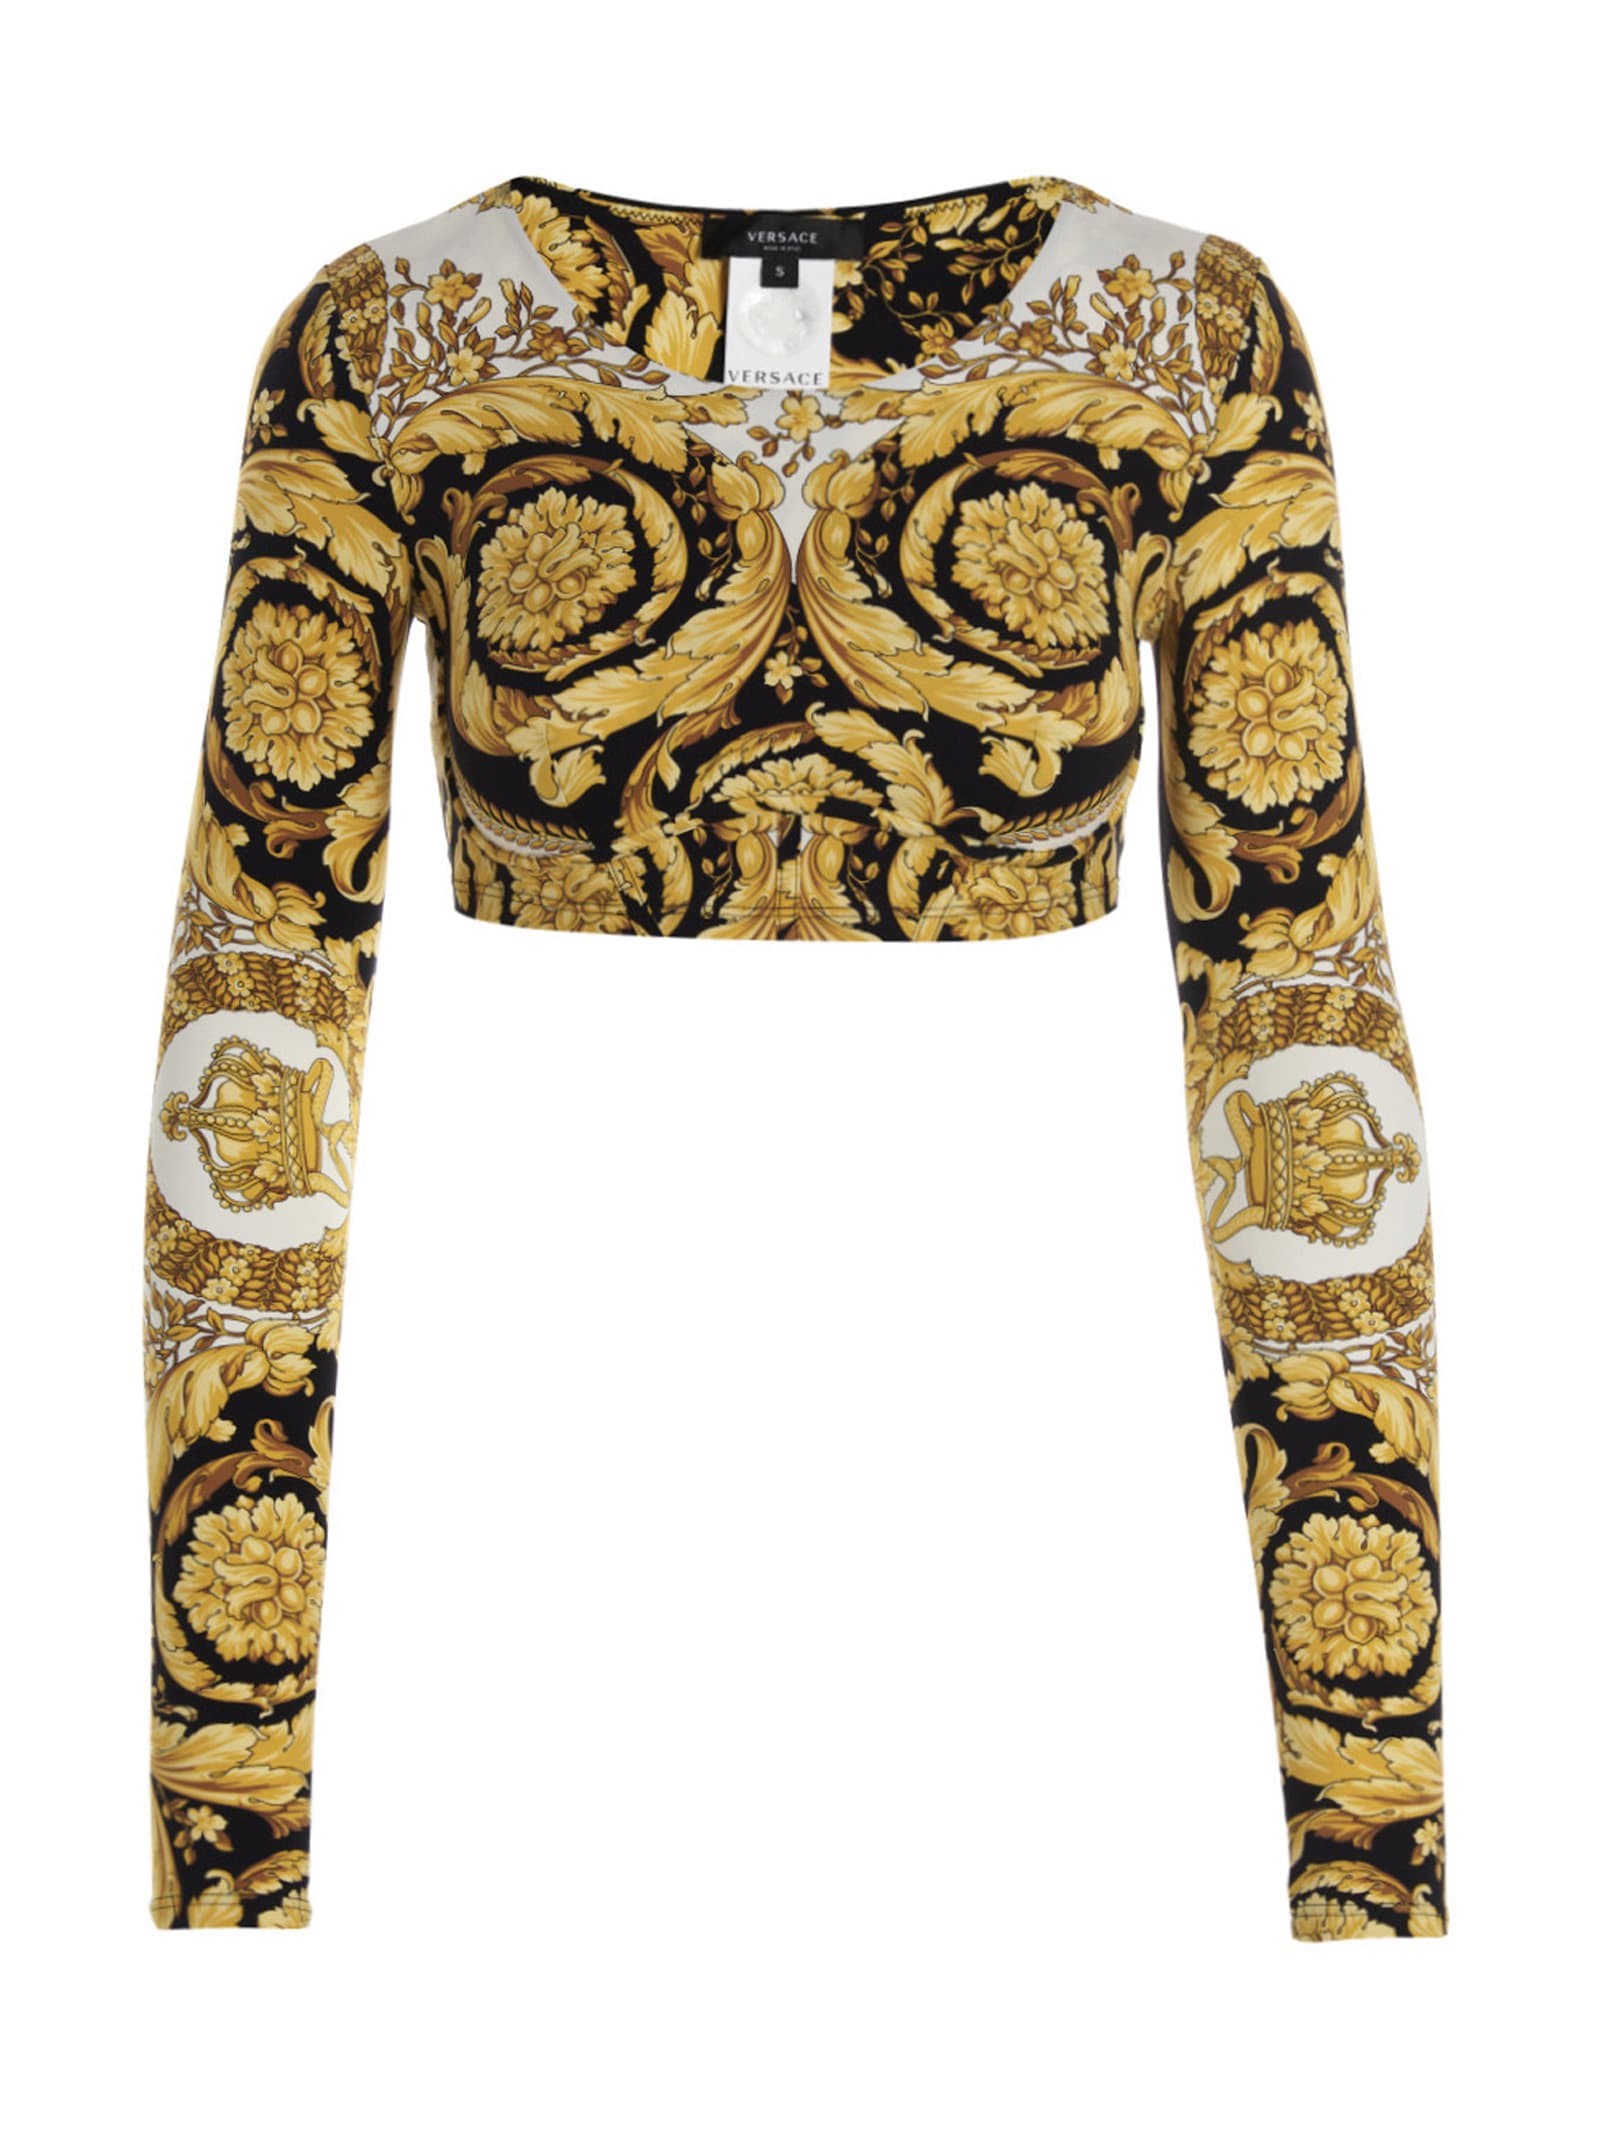 VERSACE BAROCCO CROPPED TOP